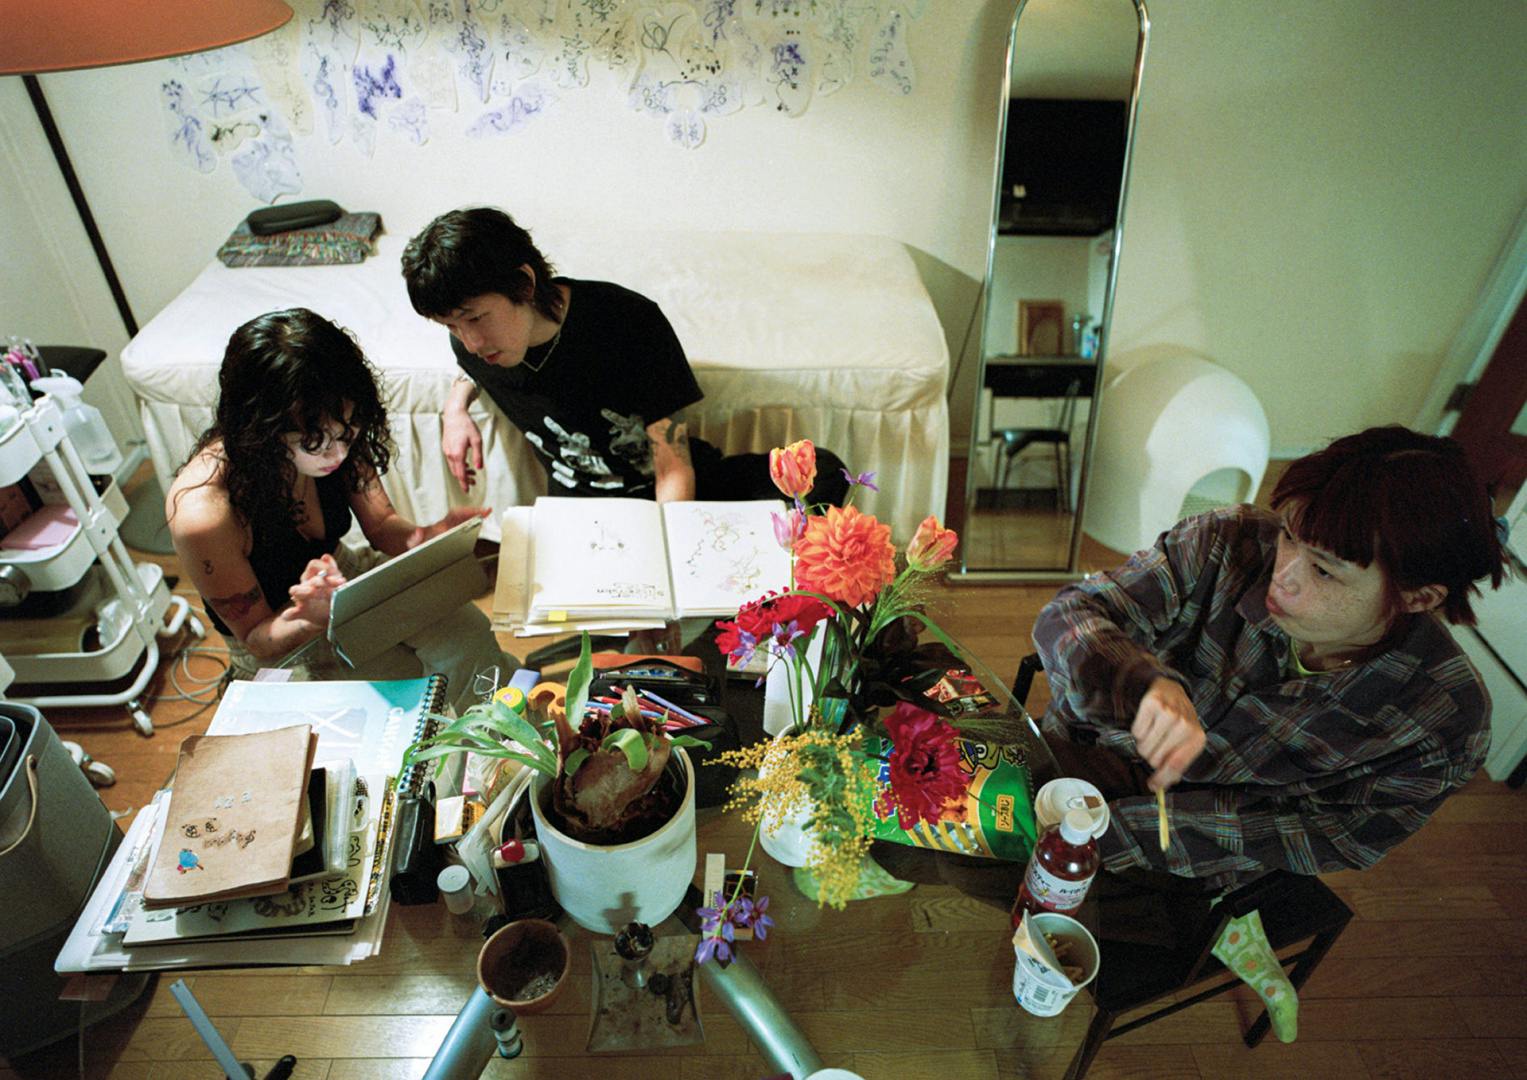 Photograph from Dazed and Ikea's zine showing three people sat around a table in in a bedroom turned tattoo studio